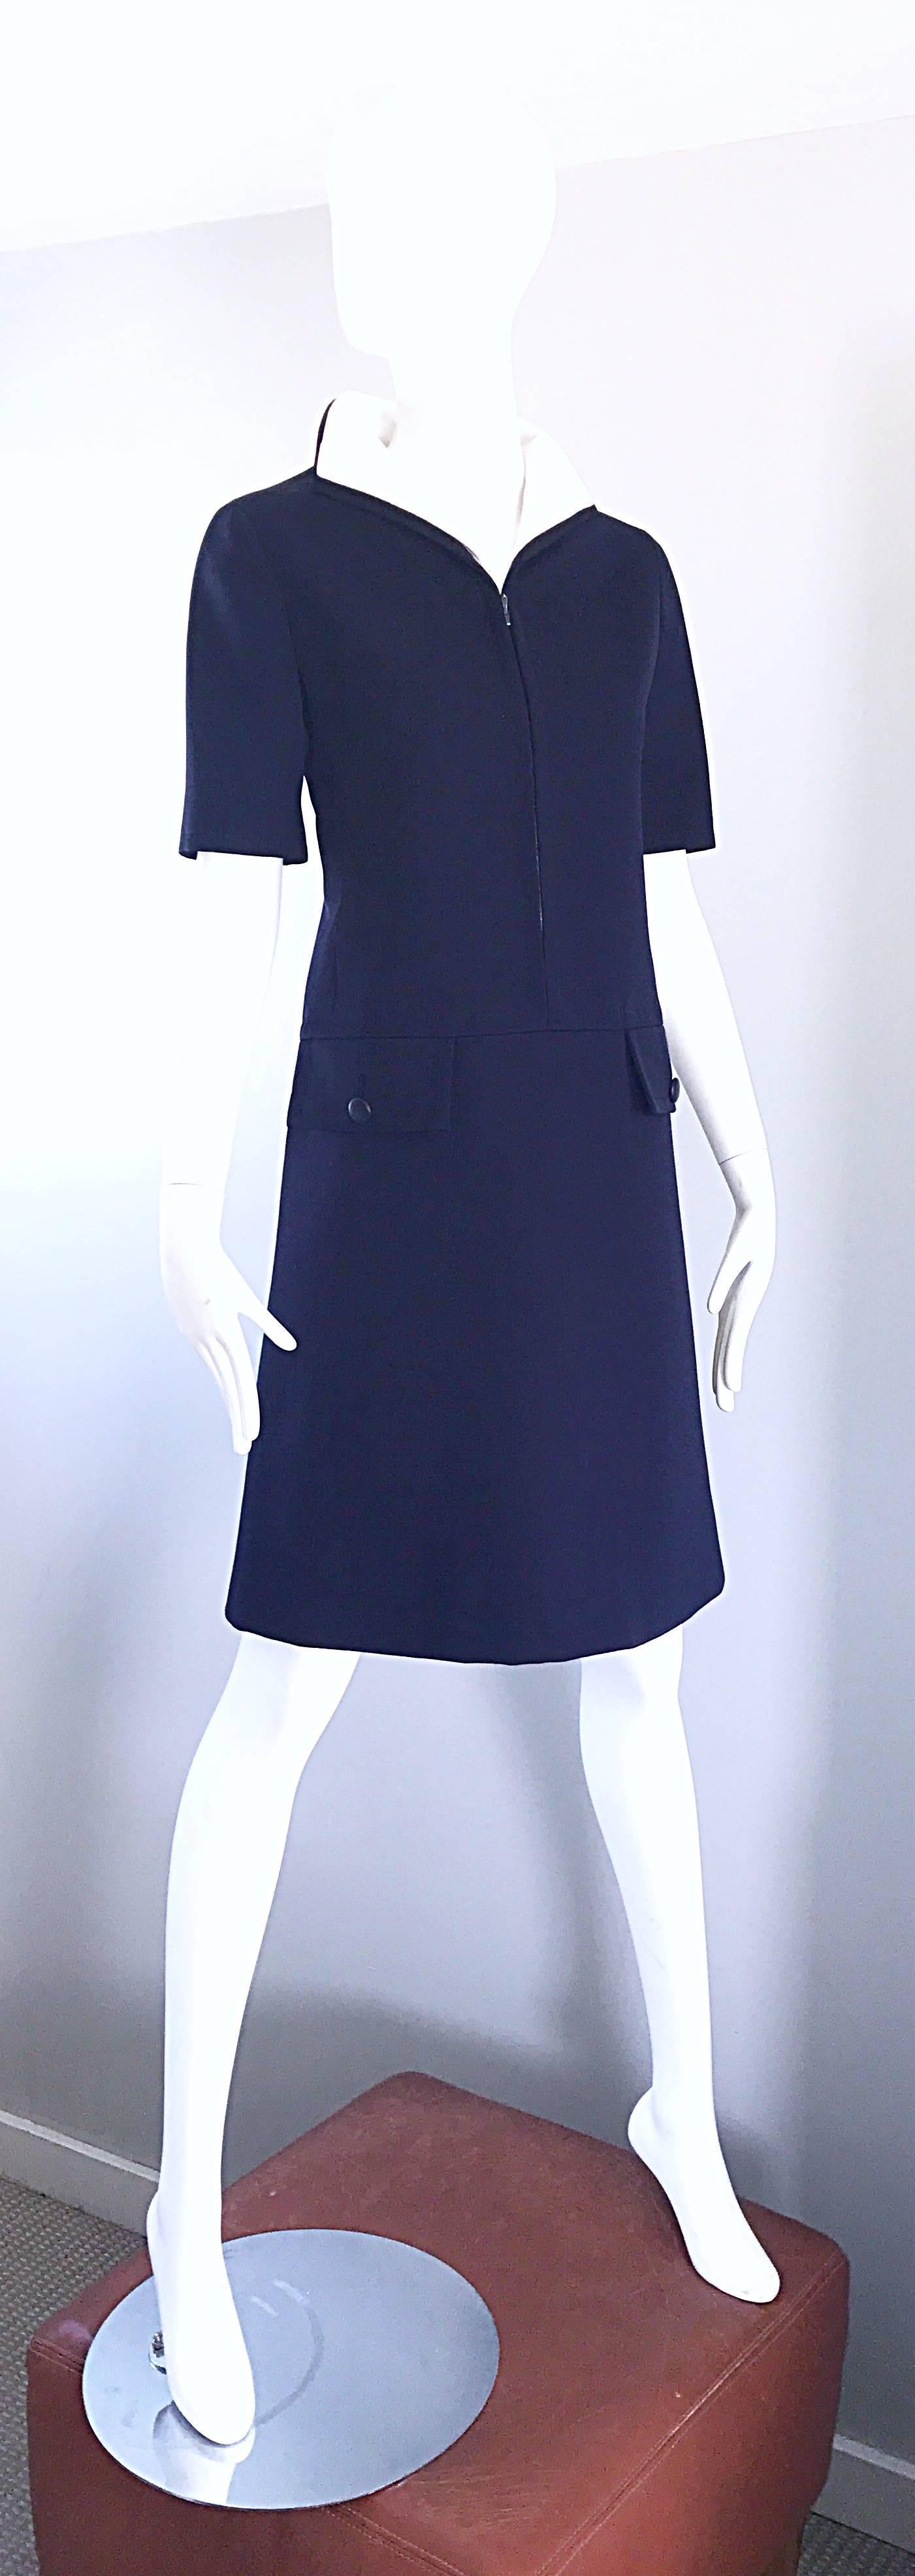 Yves Saint Laurent Haute Couture Navy Blue and White Nautical Dress, 1960s In Excellent Condition For Sale In San Diego, CA